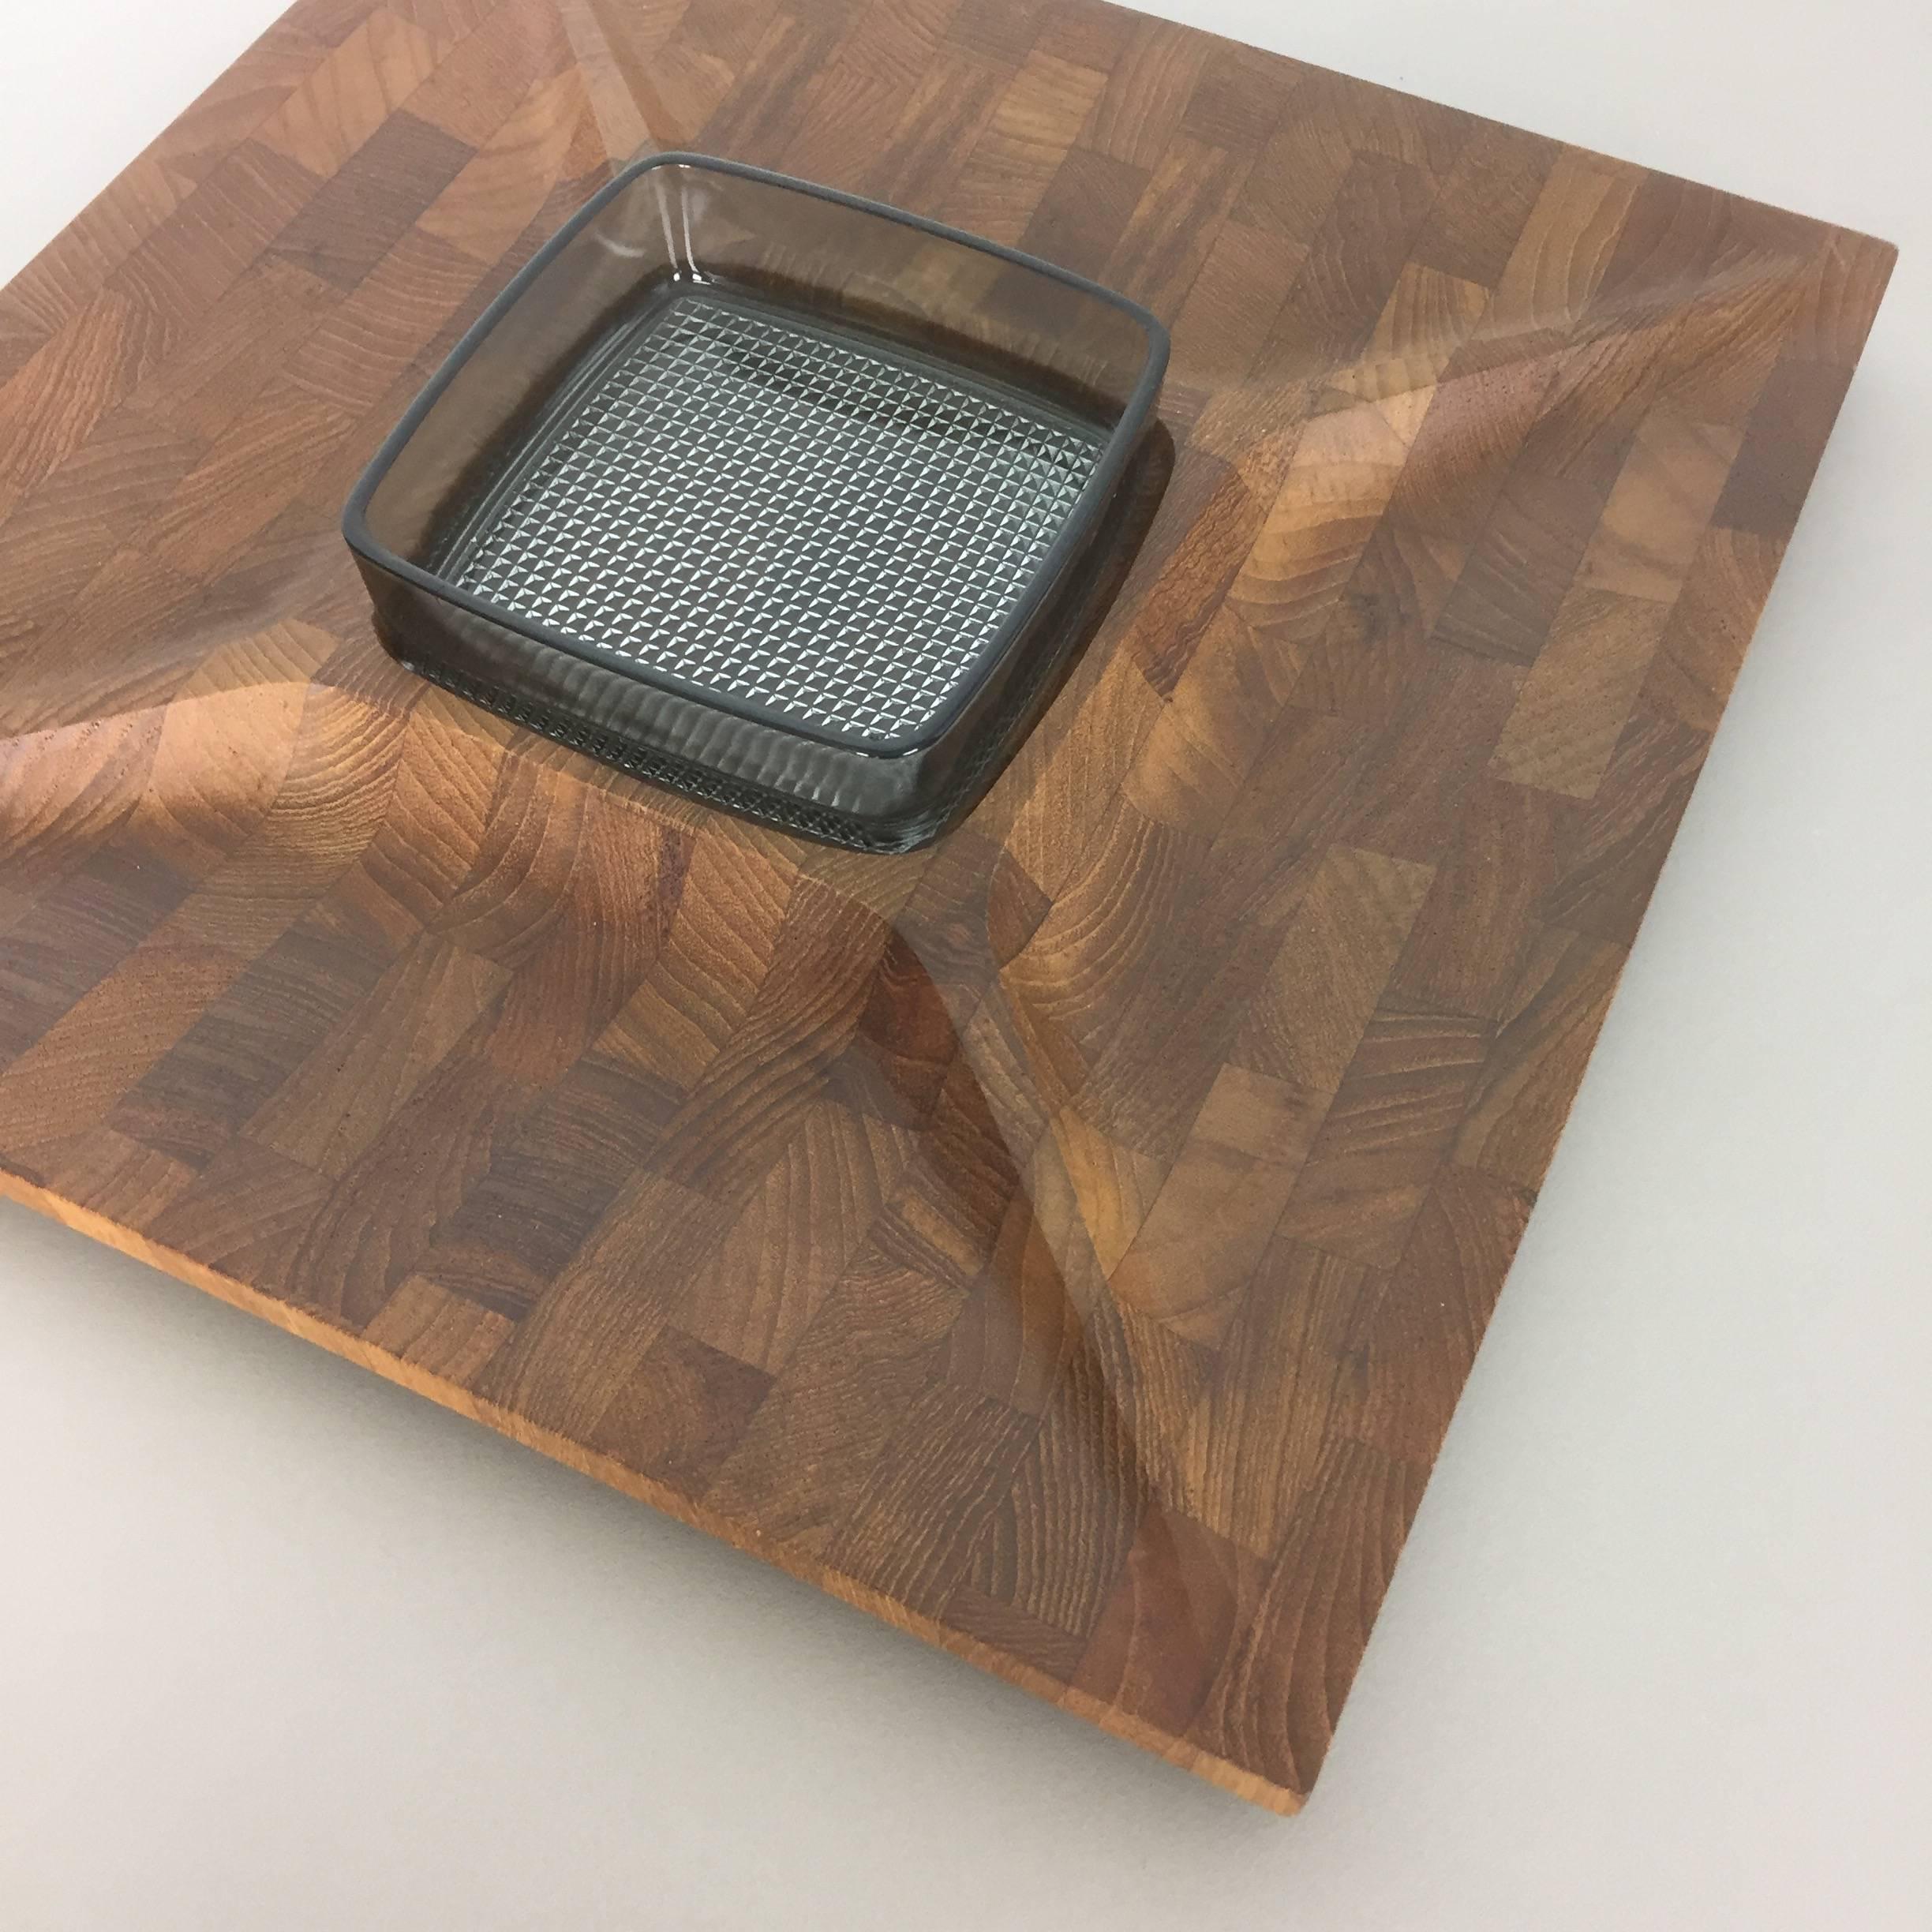 Glass Danish Shell Bowl in Solid Teak Wood, by Digsmed Made in Denmark, 1960s